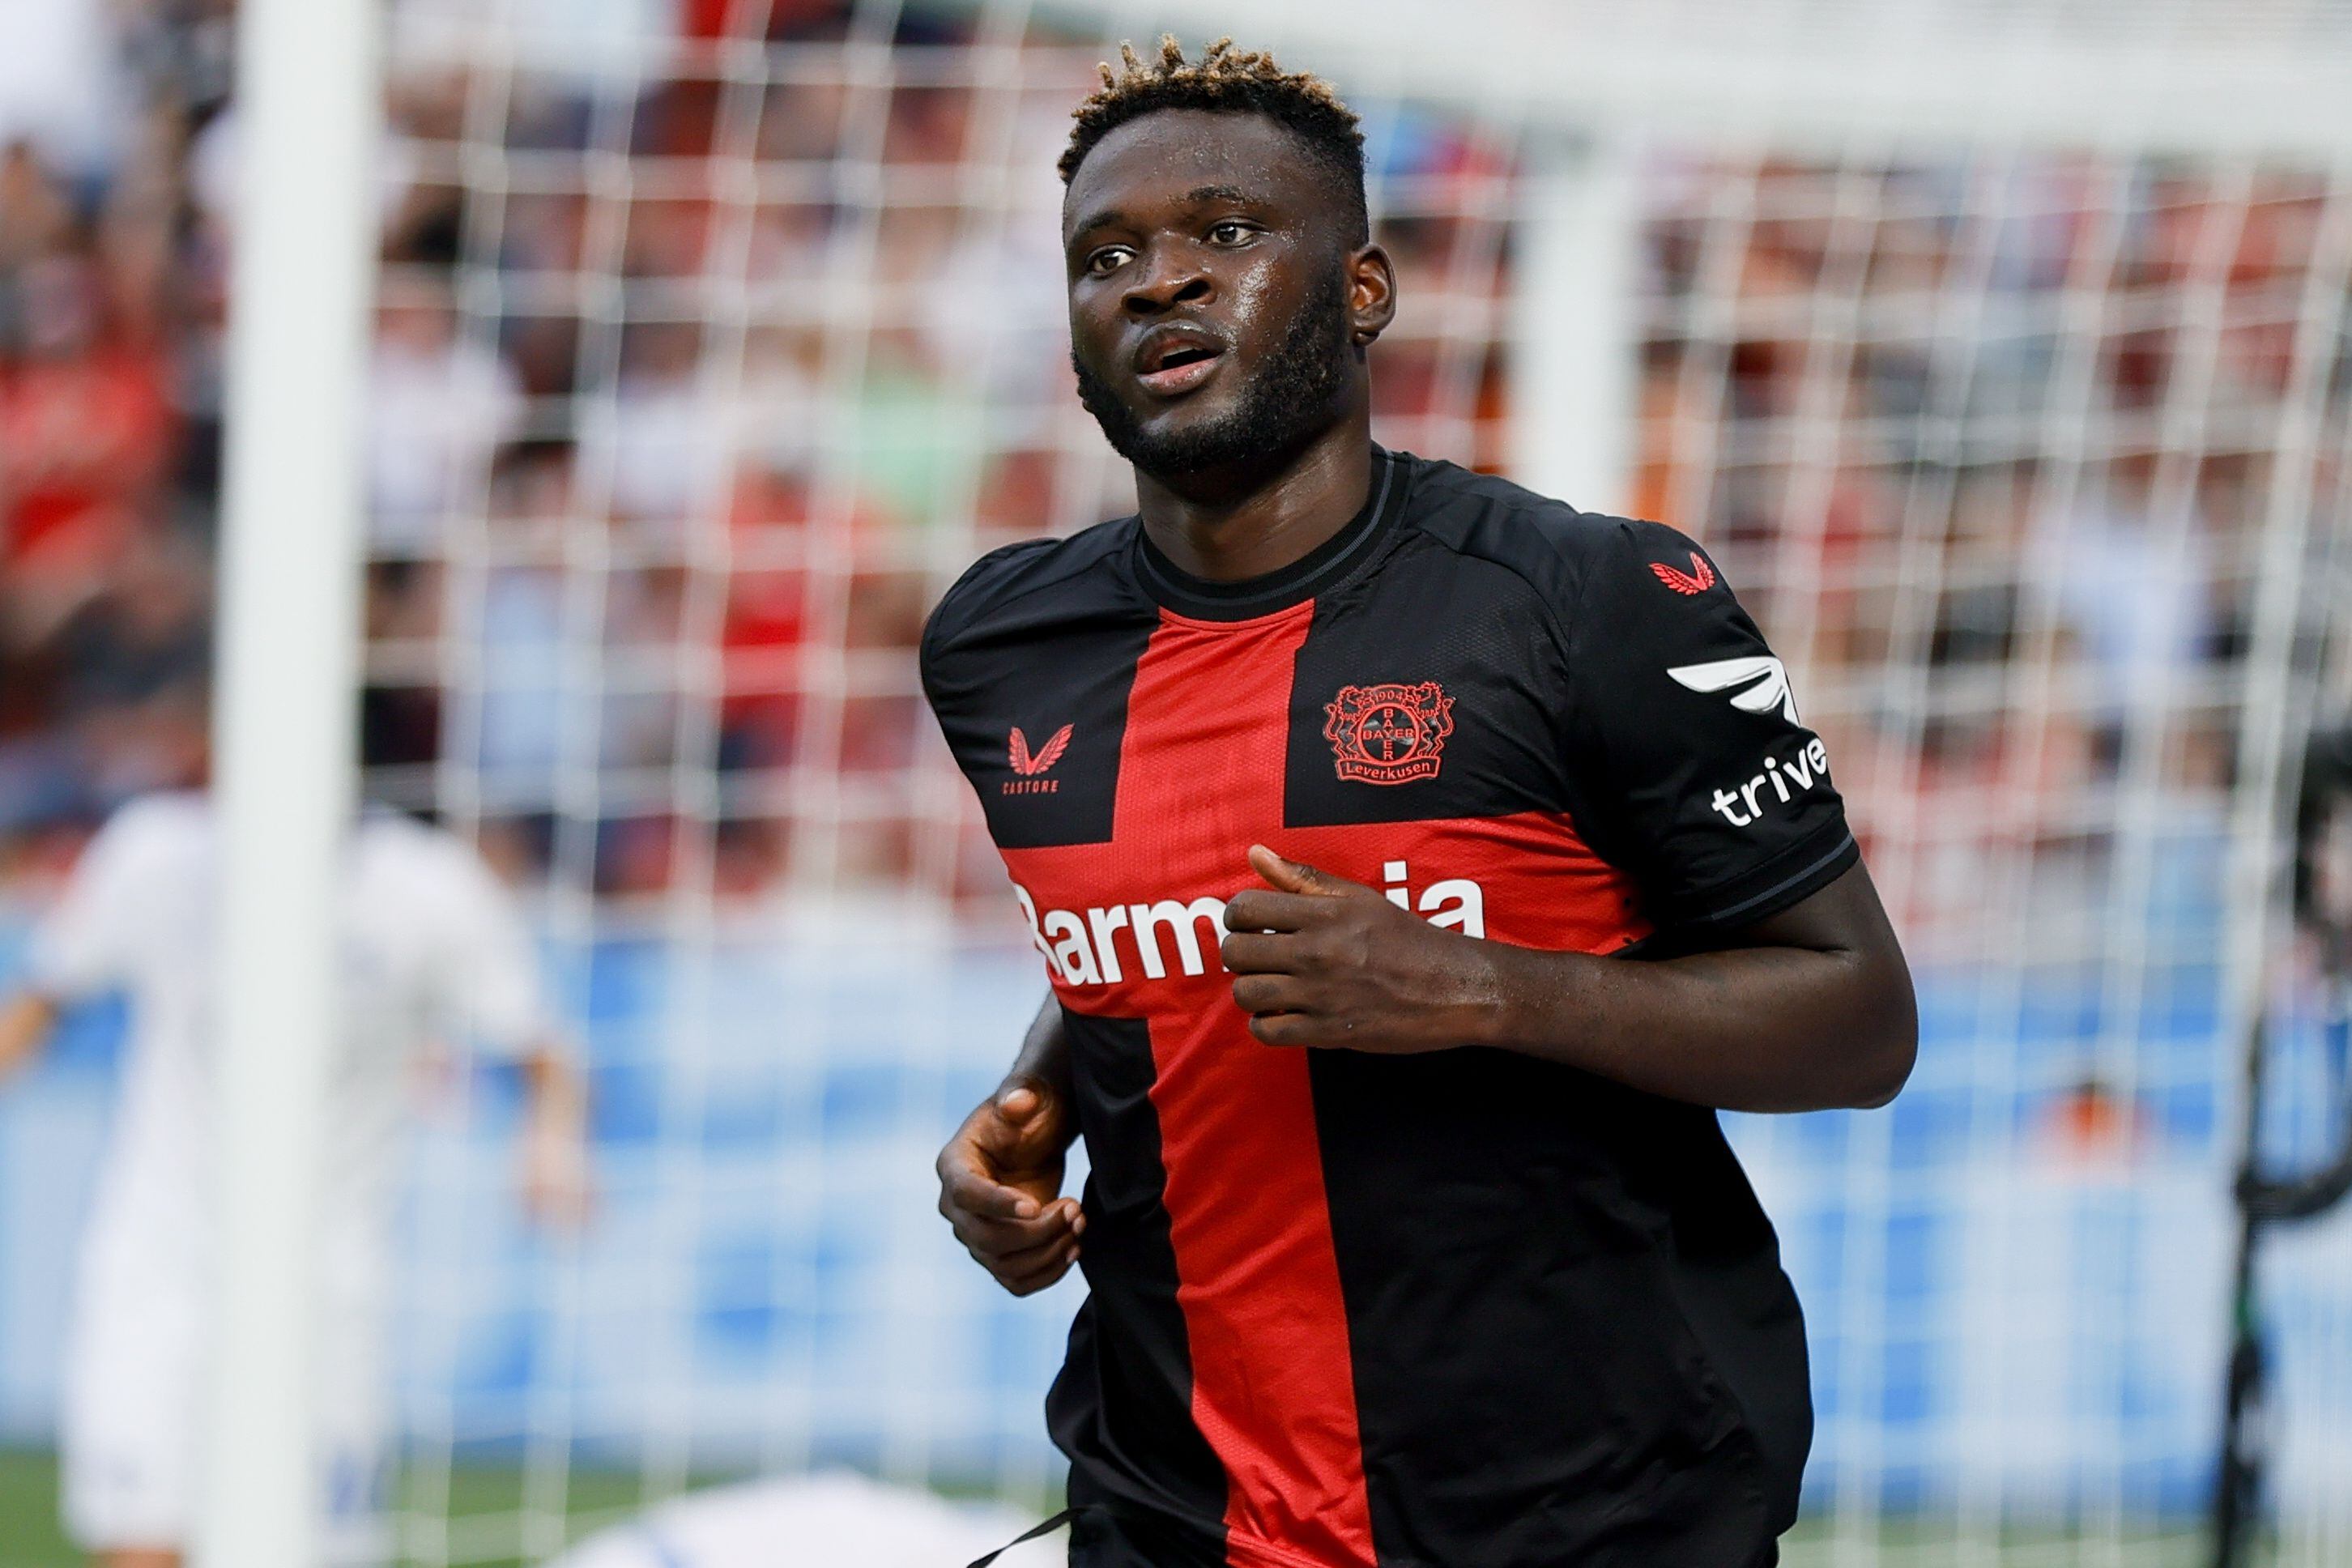 Leverkusen (Germany), 02/09/2023.- Victor Boniface of Leverkusen celebrates after scoring the opening goal in the German Bundesliga soccer match between Bayer Leverkusen and SV Darmstadt 98 in Leverkusen, Germany, 02 September 2023. (Alemania) EFE/EPA/Ronald Wittek CONDITIONS - ATTENTION: The DFL regulations prohibit any use of photographs as image sequences and/or quasi-video.
